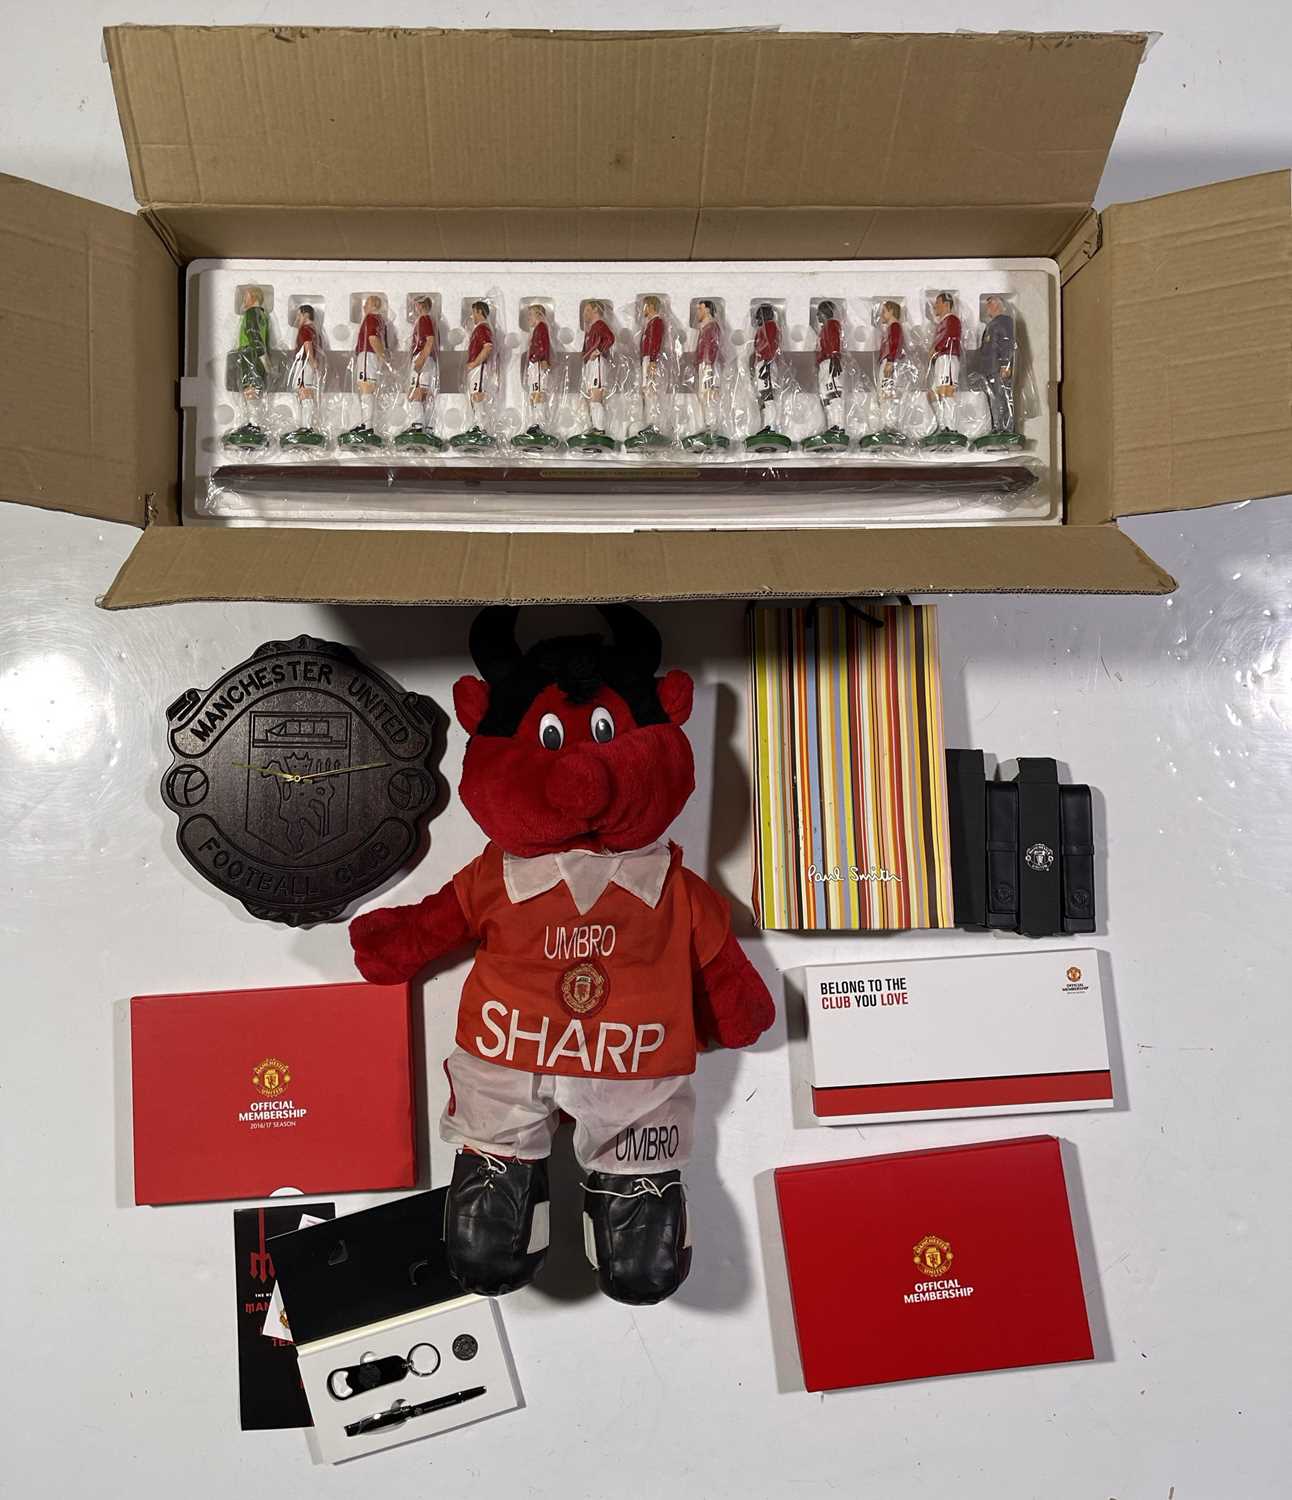 OFFICIAL 1999 MANCHESTER UNITED FIGURINE SET.